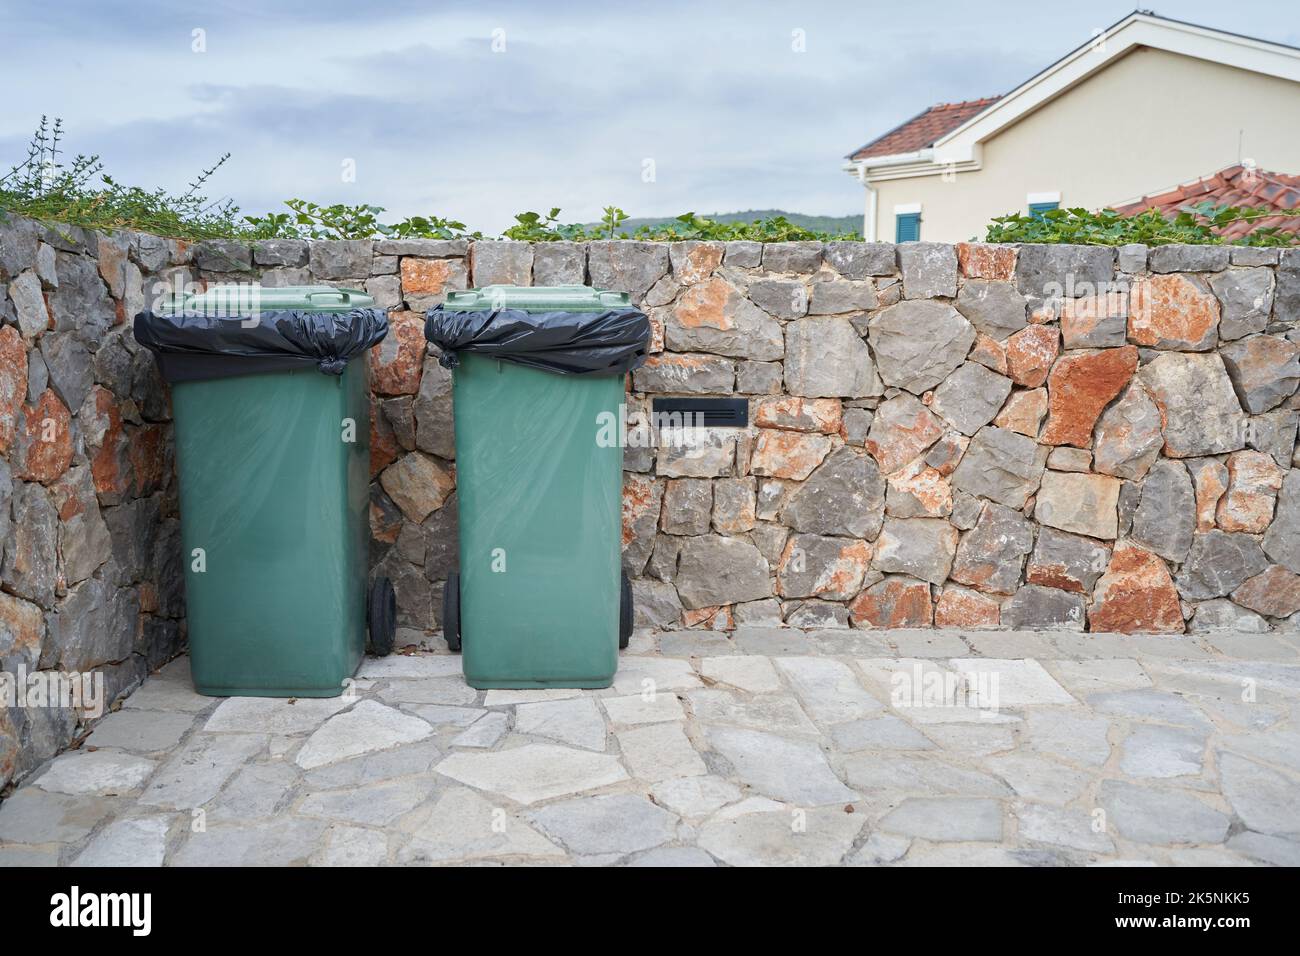 Green garbage cans next to the stone wall. Stock Photo